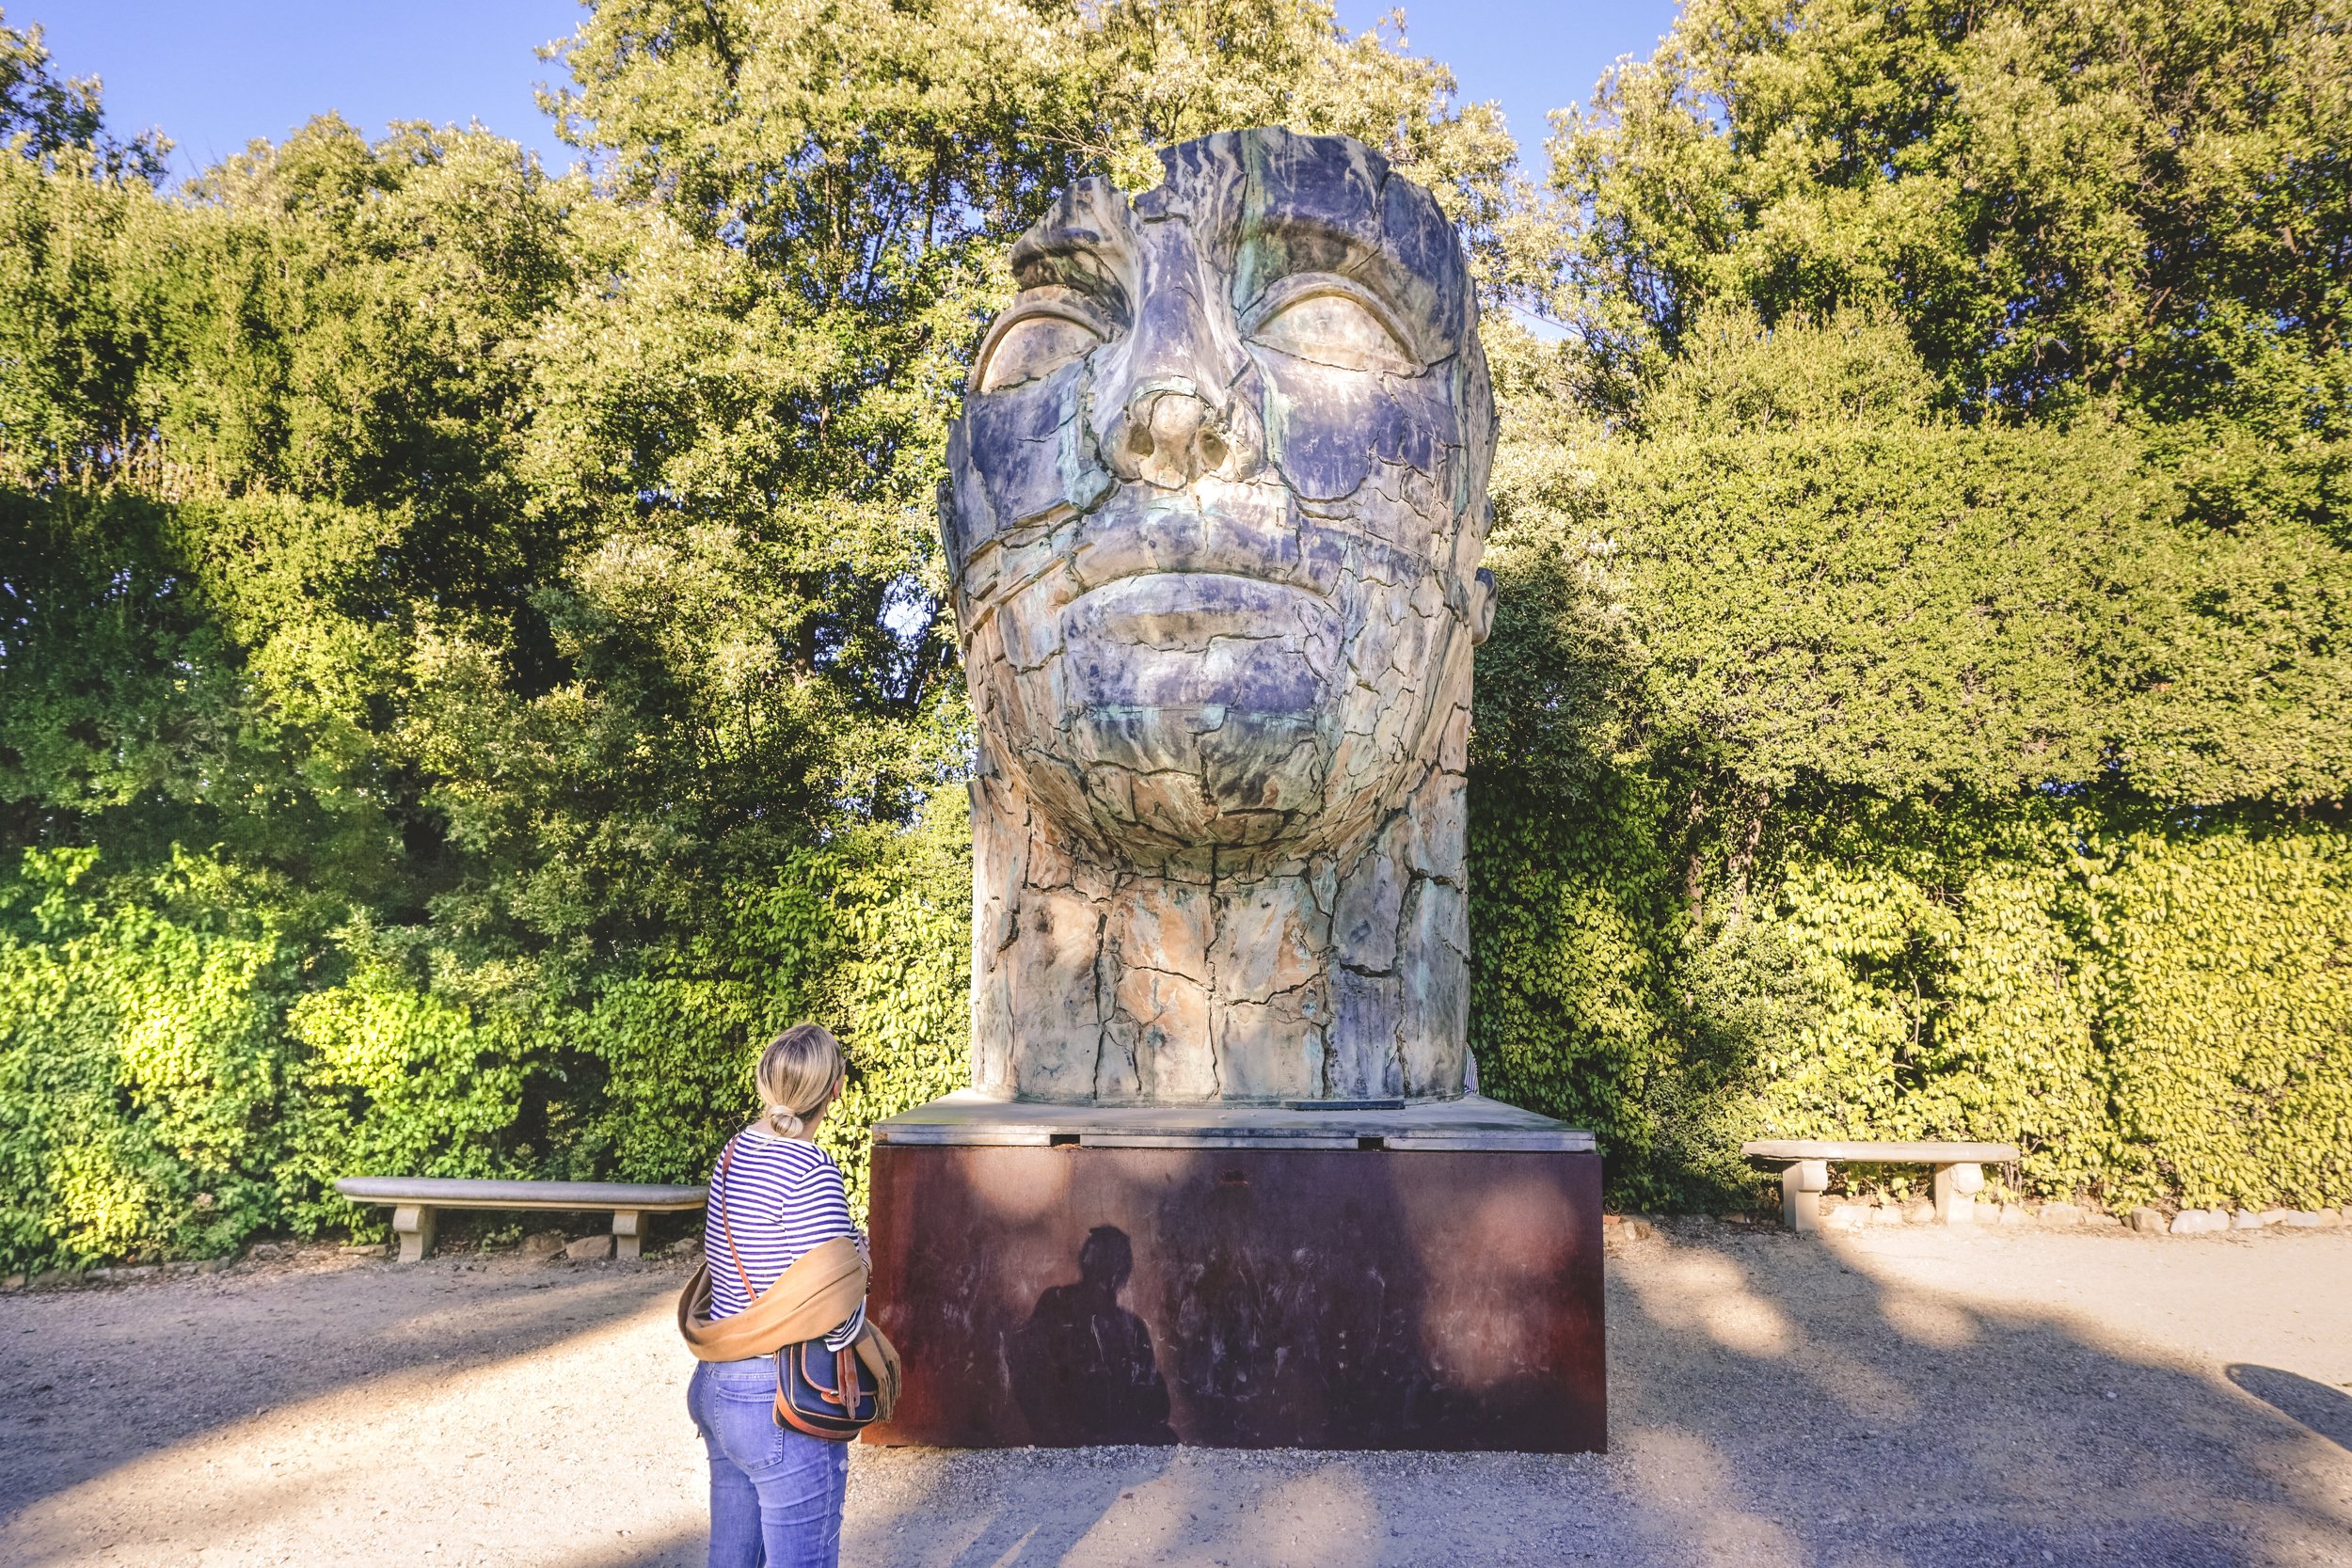 The Tindaro Screpolato in the Boboli Garden provokes as much emotion now as it has for decades. 